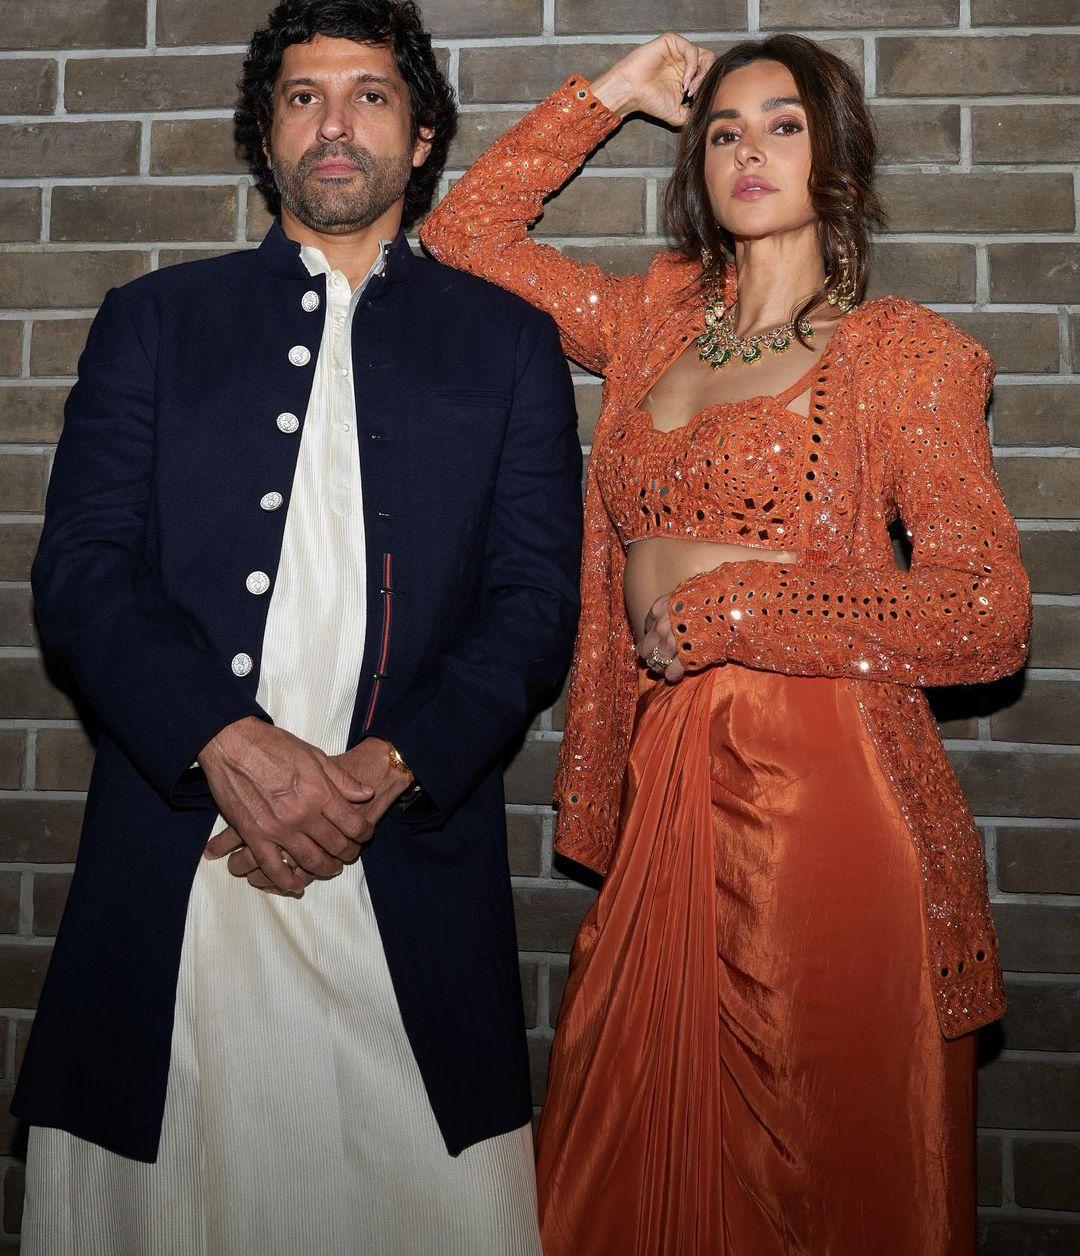 Farhan Akhtar opted for a white kurta-pyjama paired with a blue sherwani, while Shibani complemented him in a contrasting orange outfit, striking the perfect balance between comfort and ethnic vibes